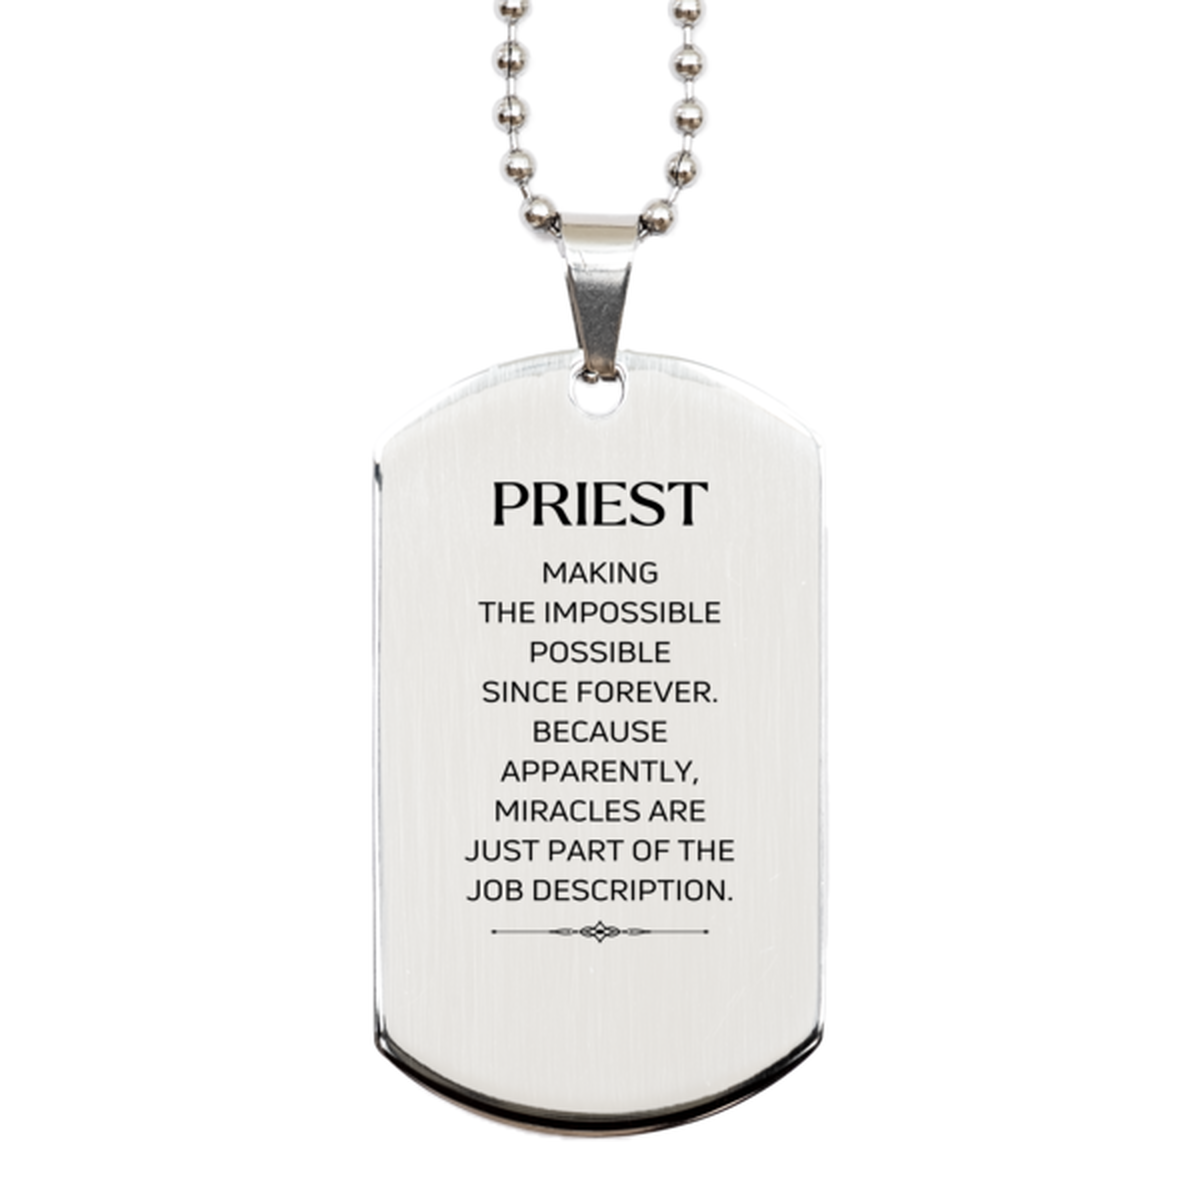 Funny Priest Gifts, Miracles are just part of the job description, Inspirational Birthday Silver Dog Tag For Priest, Men, Women, Coworkers, Friends, Boss